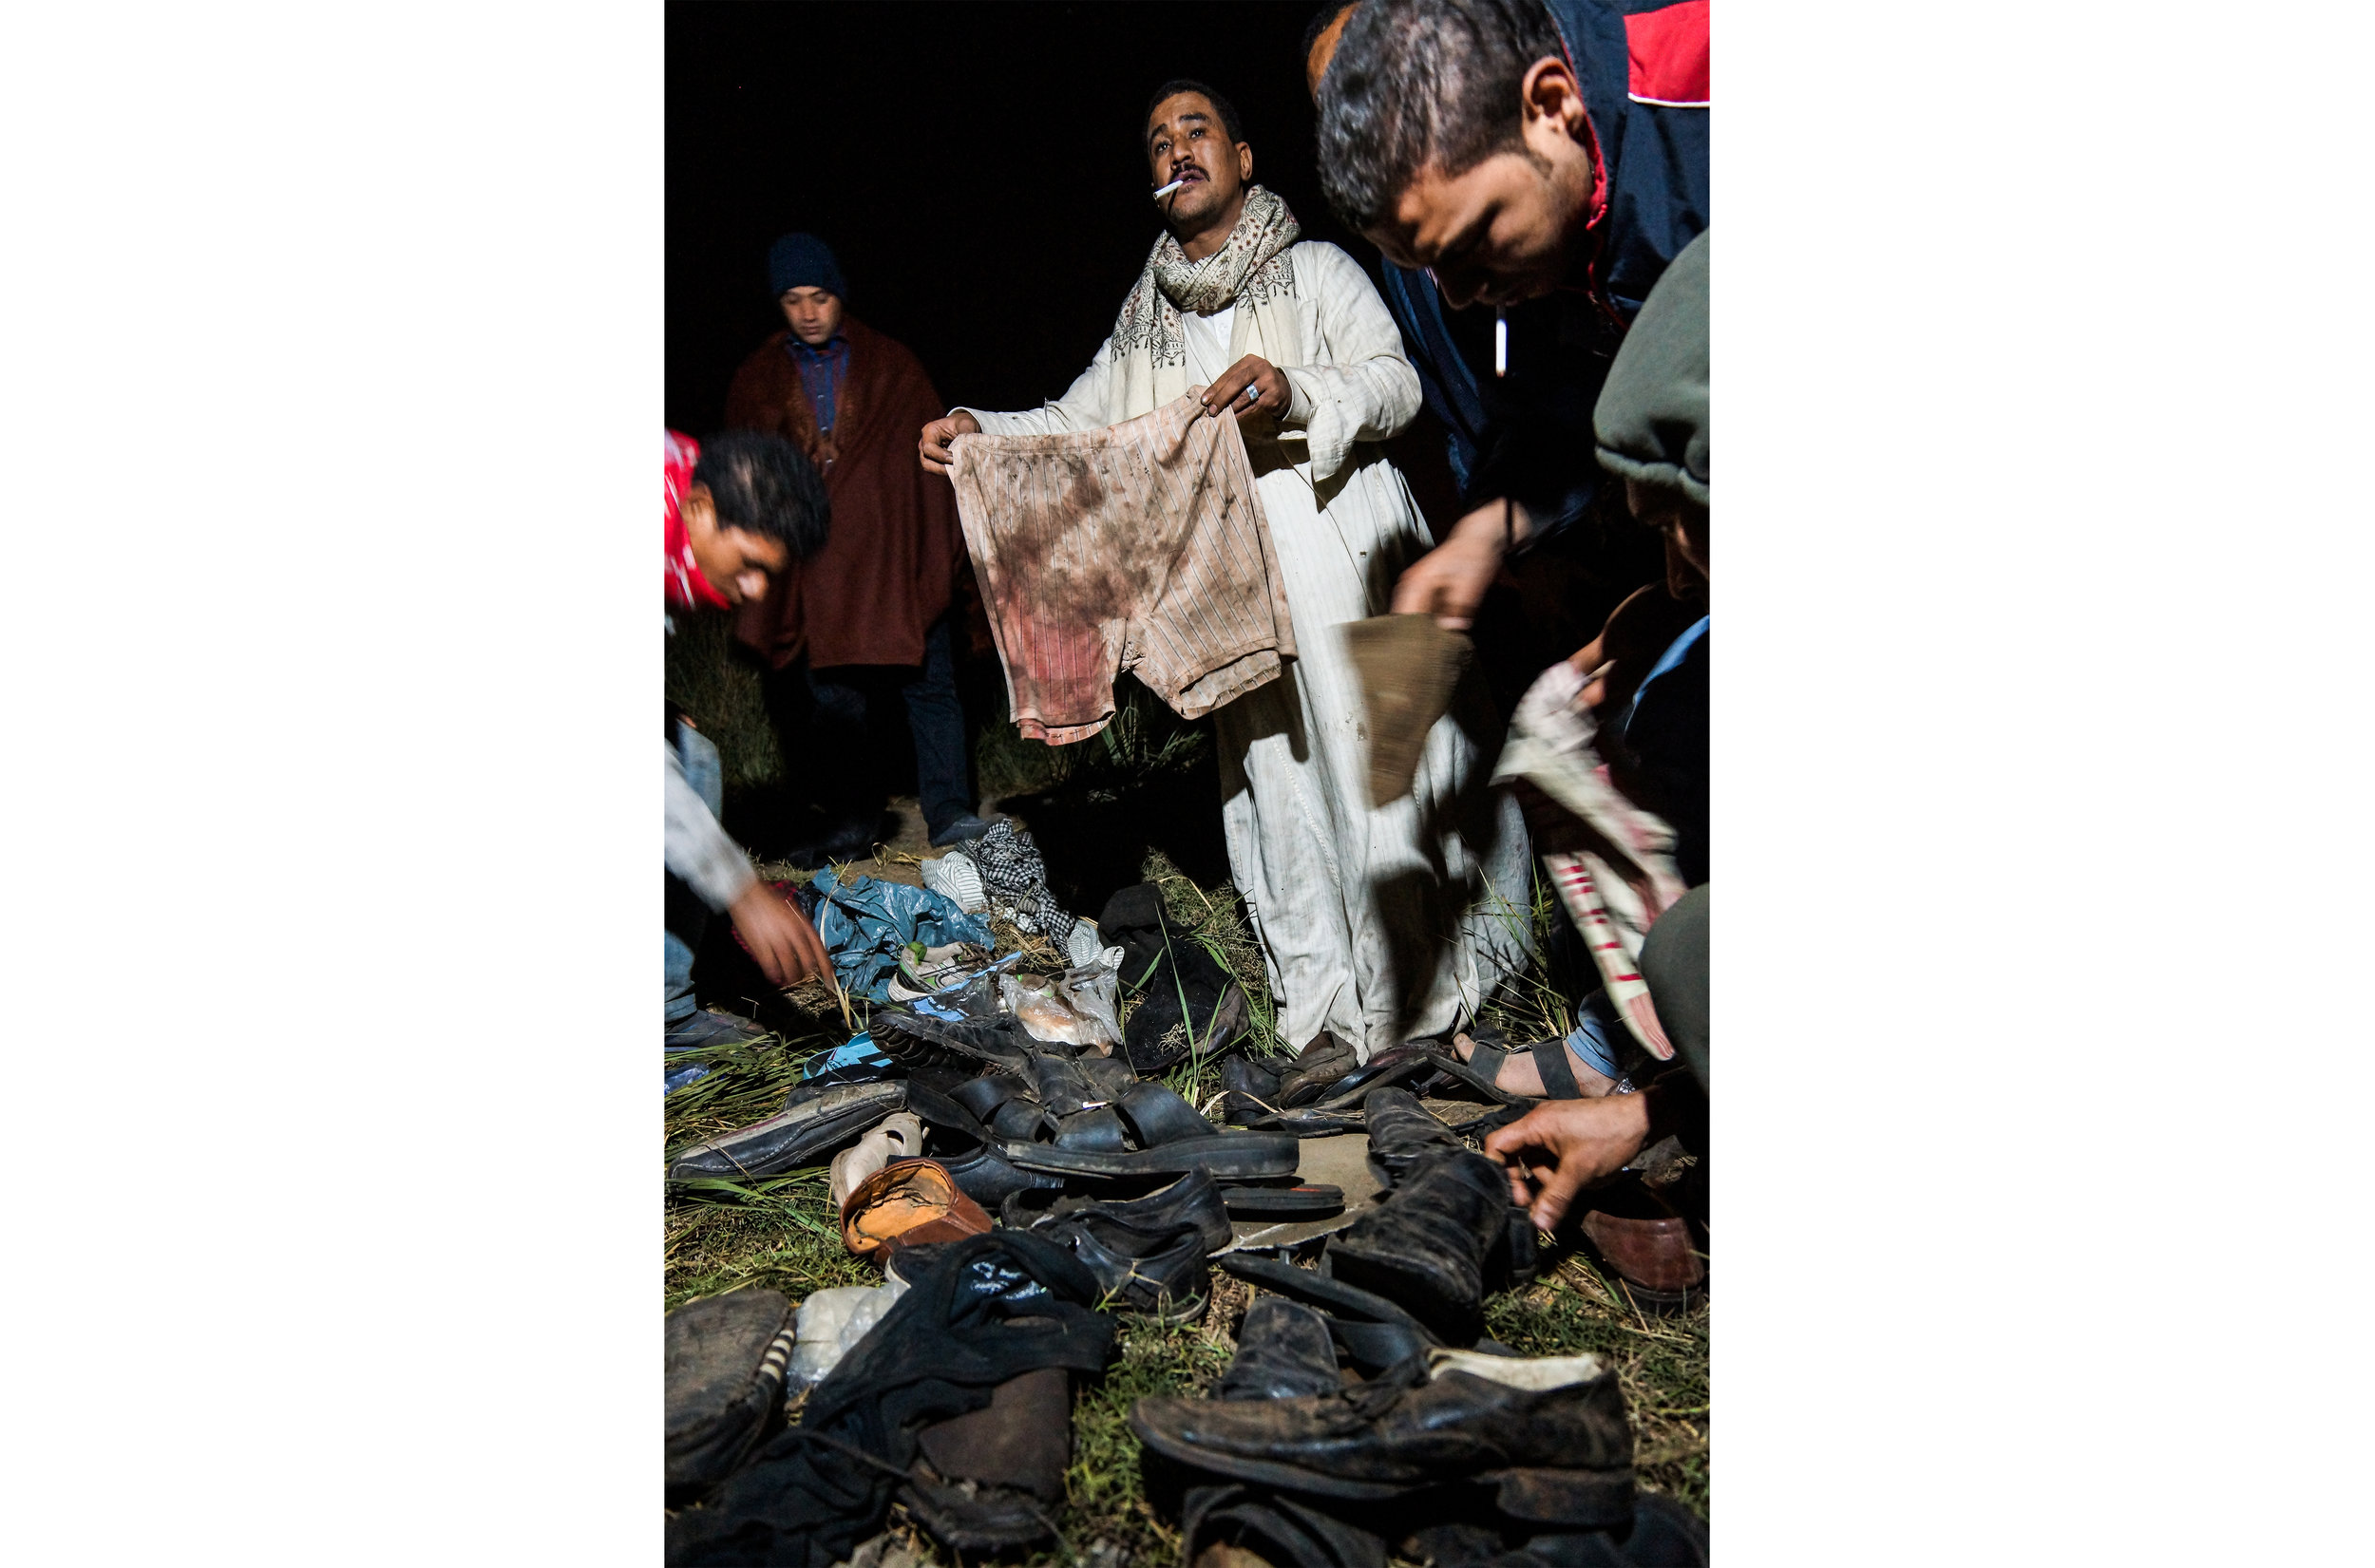 A train crash killed 19 young military conscripts on the outskirts of Cairo - January 2013